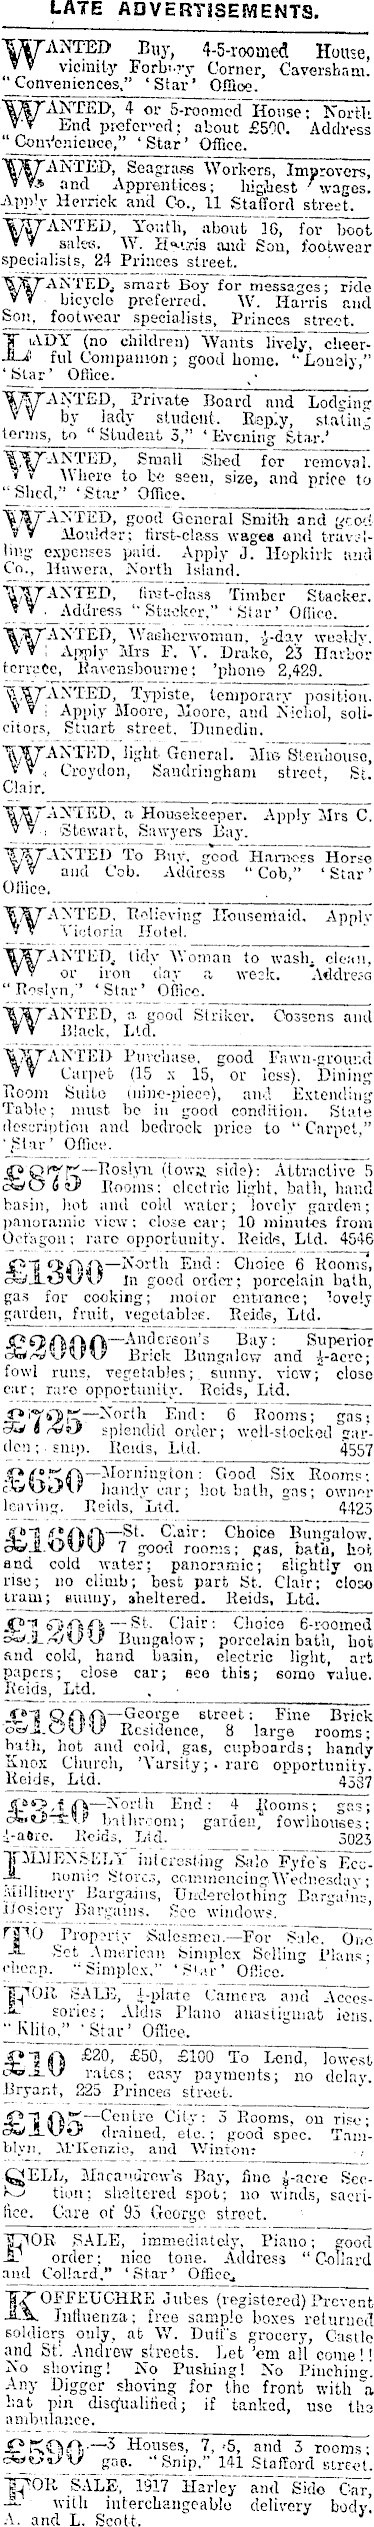 Papers Past | Newspapers | Evening Star | 17 February 1920 | Page 5  Advertisements Column 4